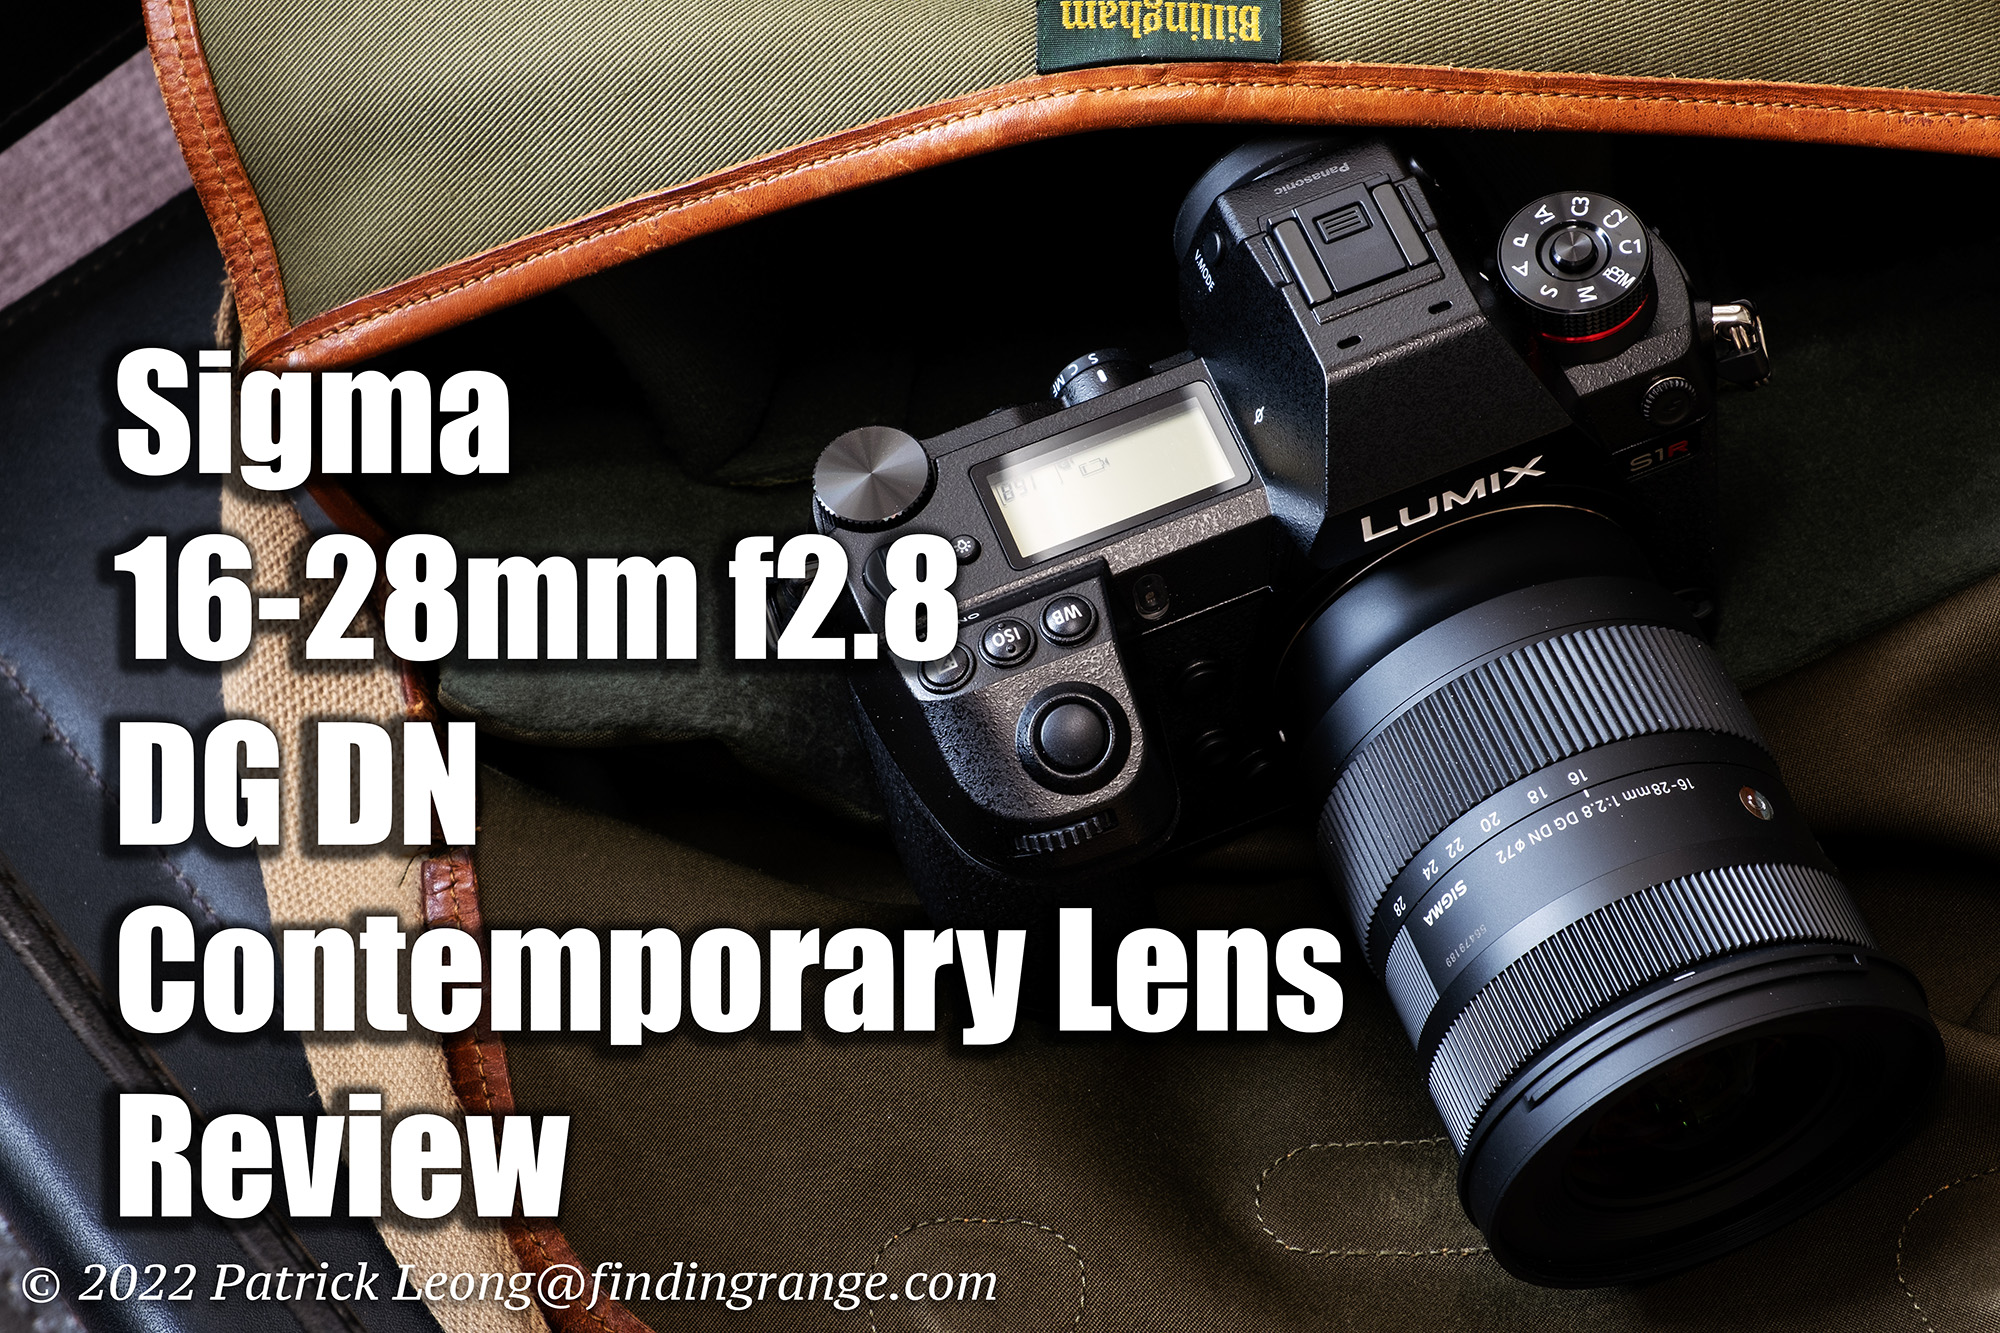 Sigma 16-28mm f2.8 DG DN Contemporary Lens Review - Finding Range